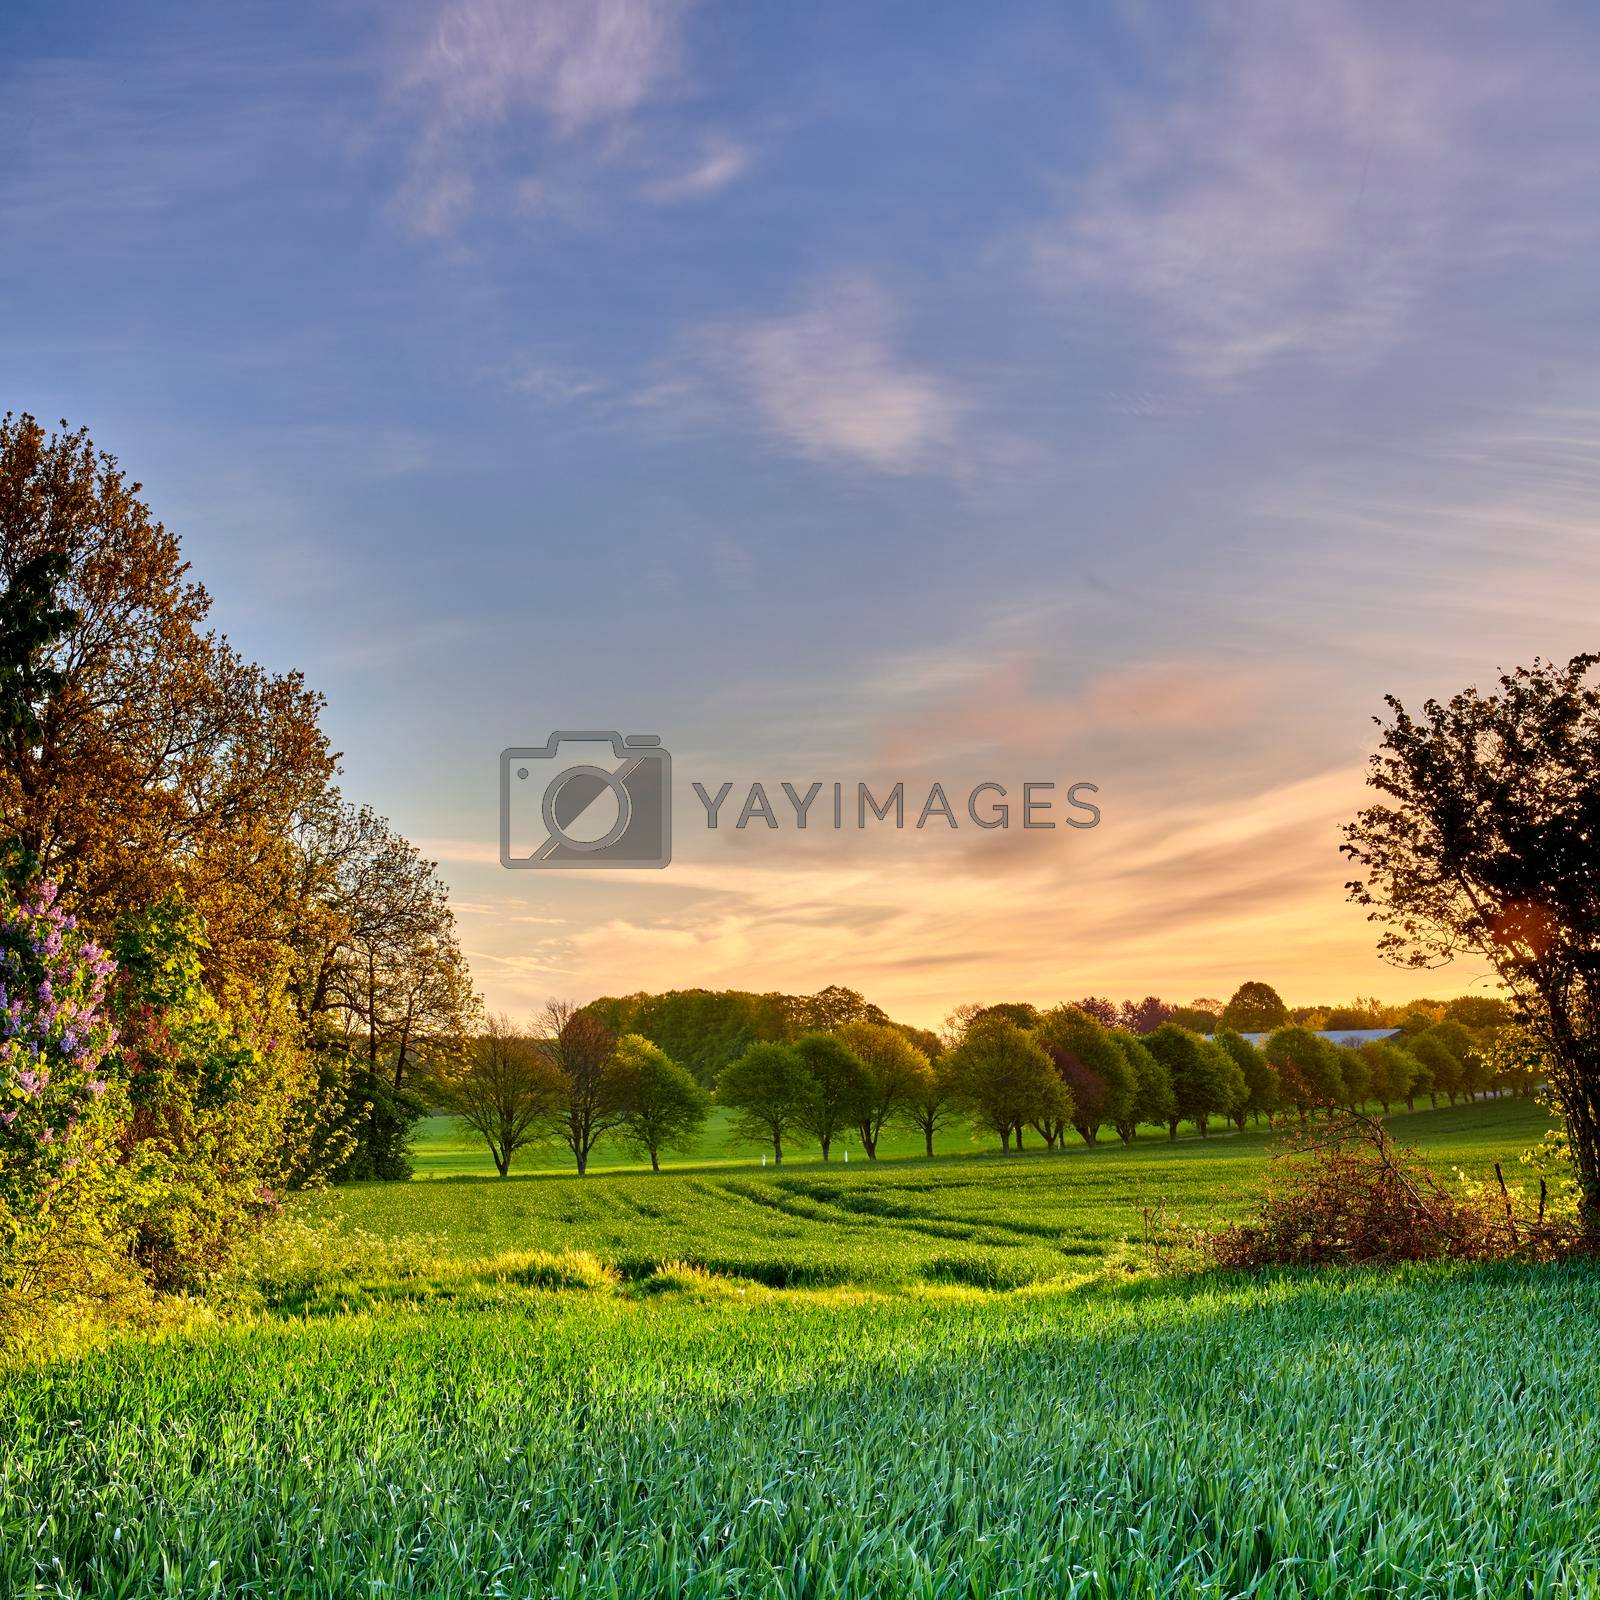 Photos from Denmark. A photo of the Danish countryside at summertime